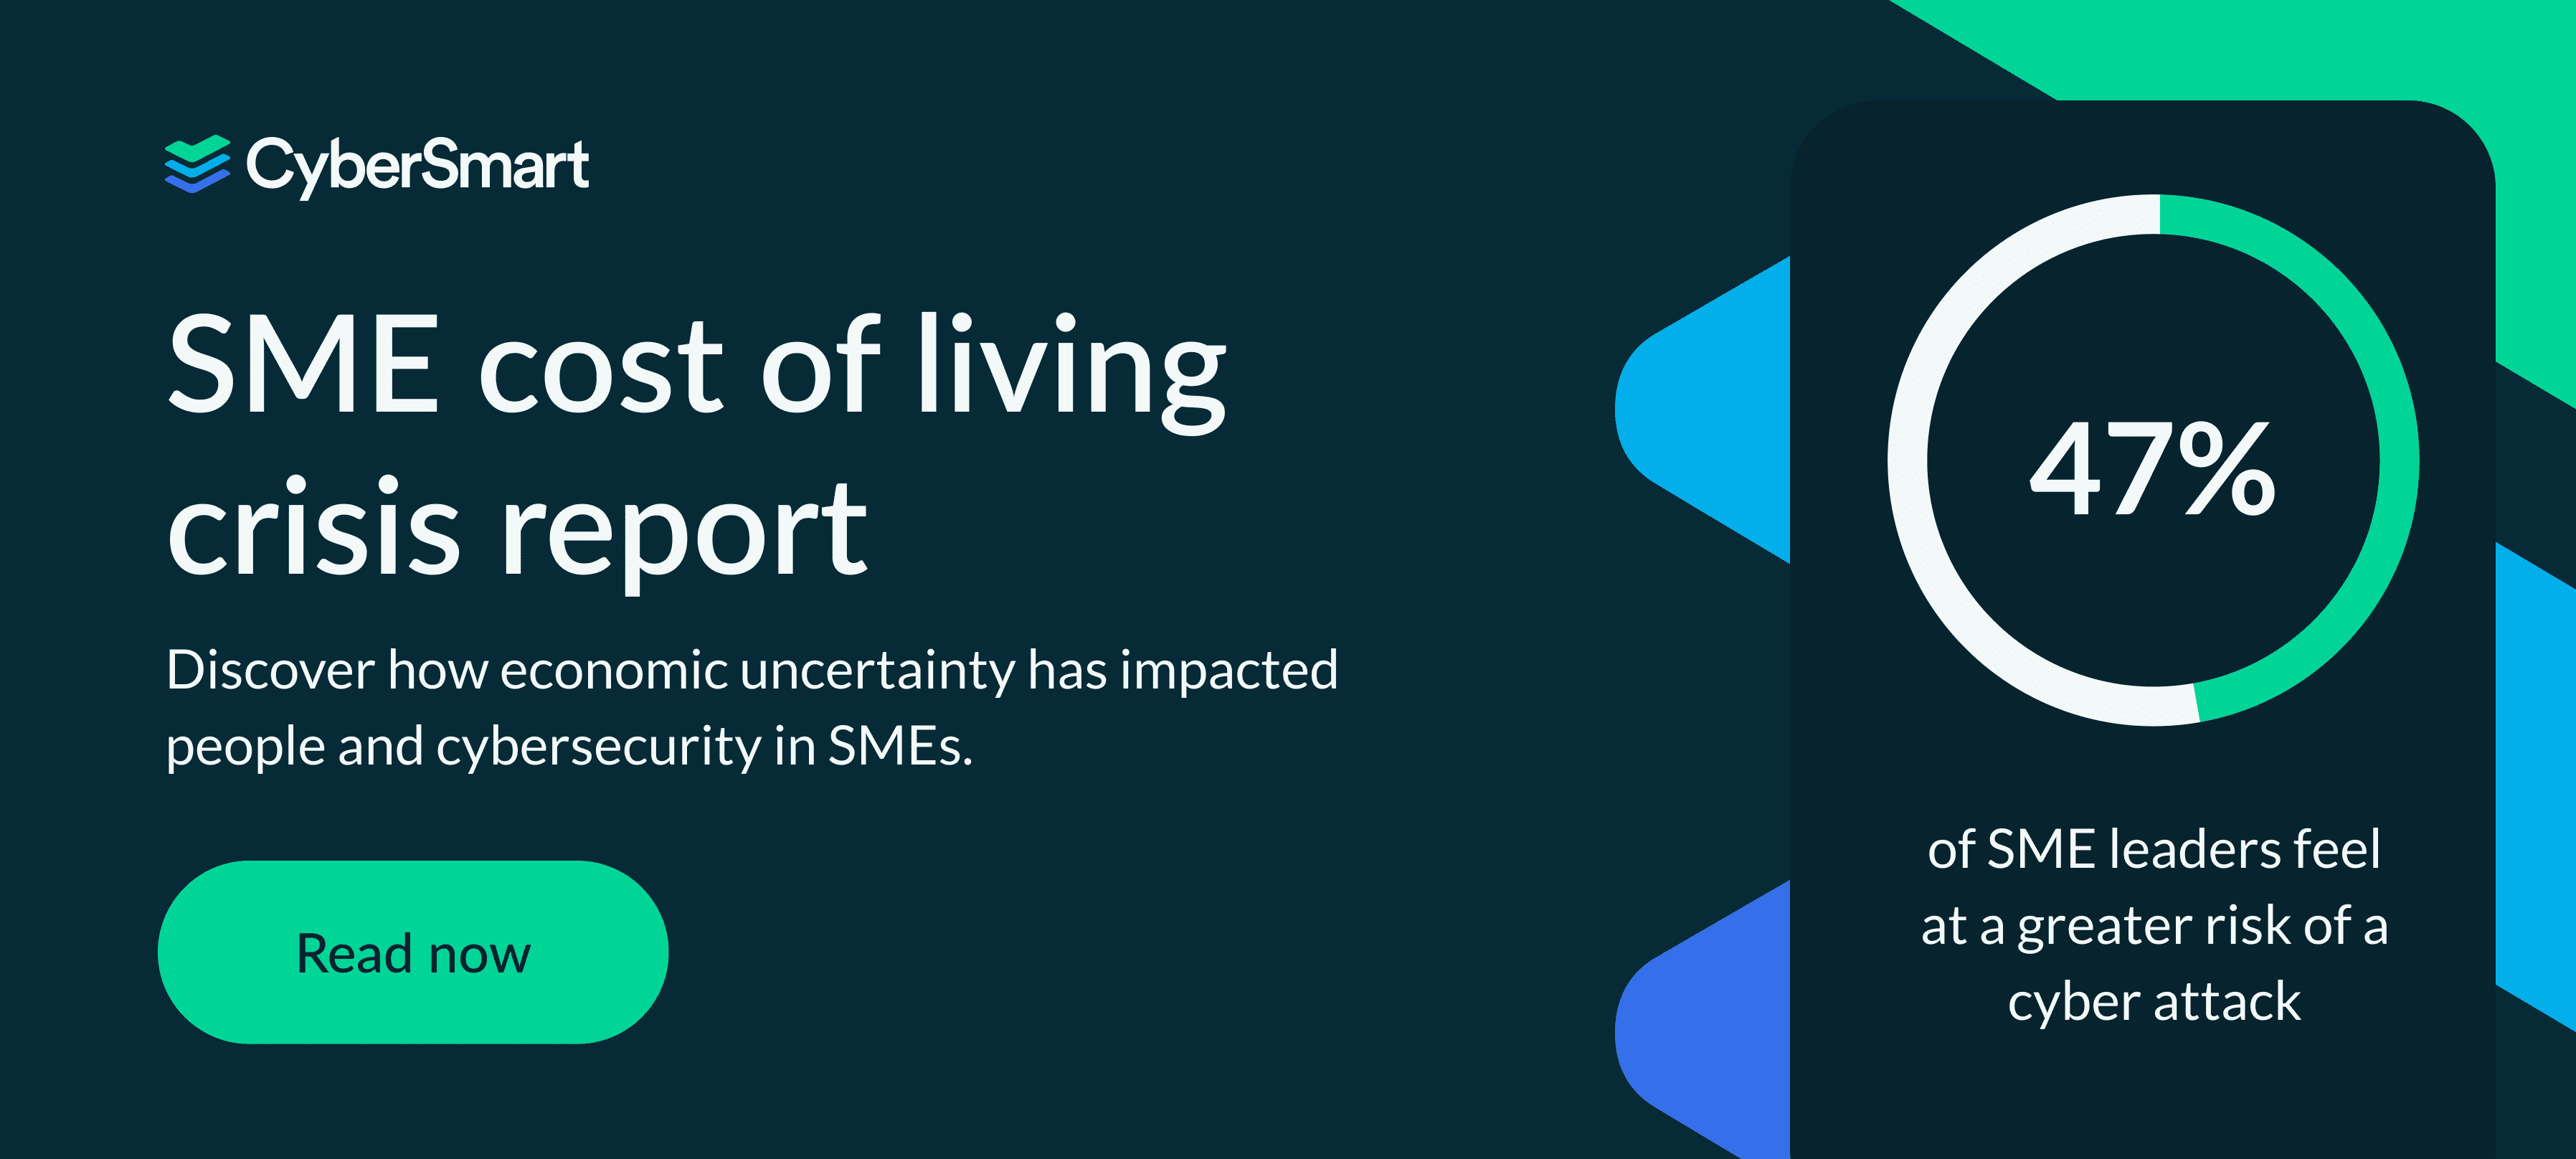 SME cost of living crisis report